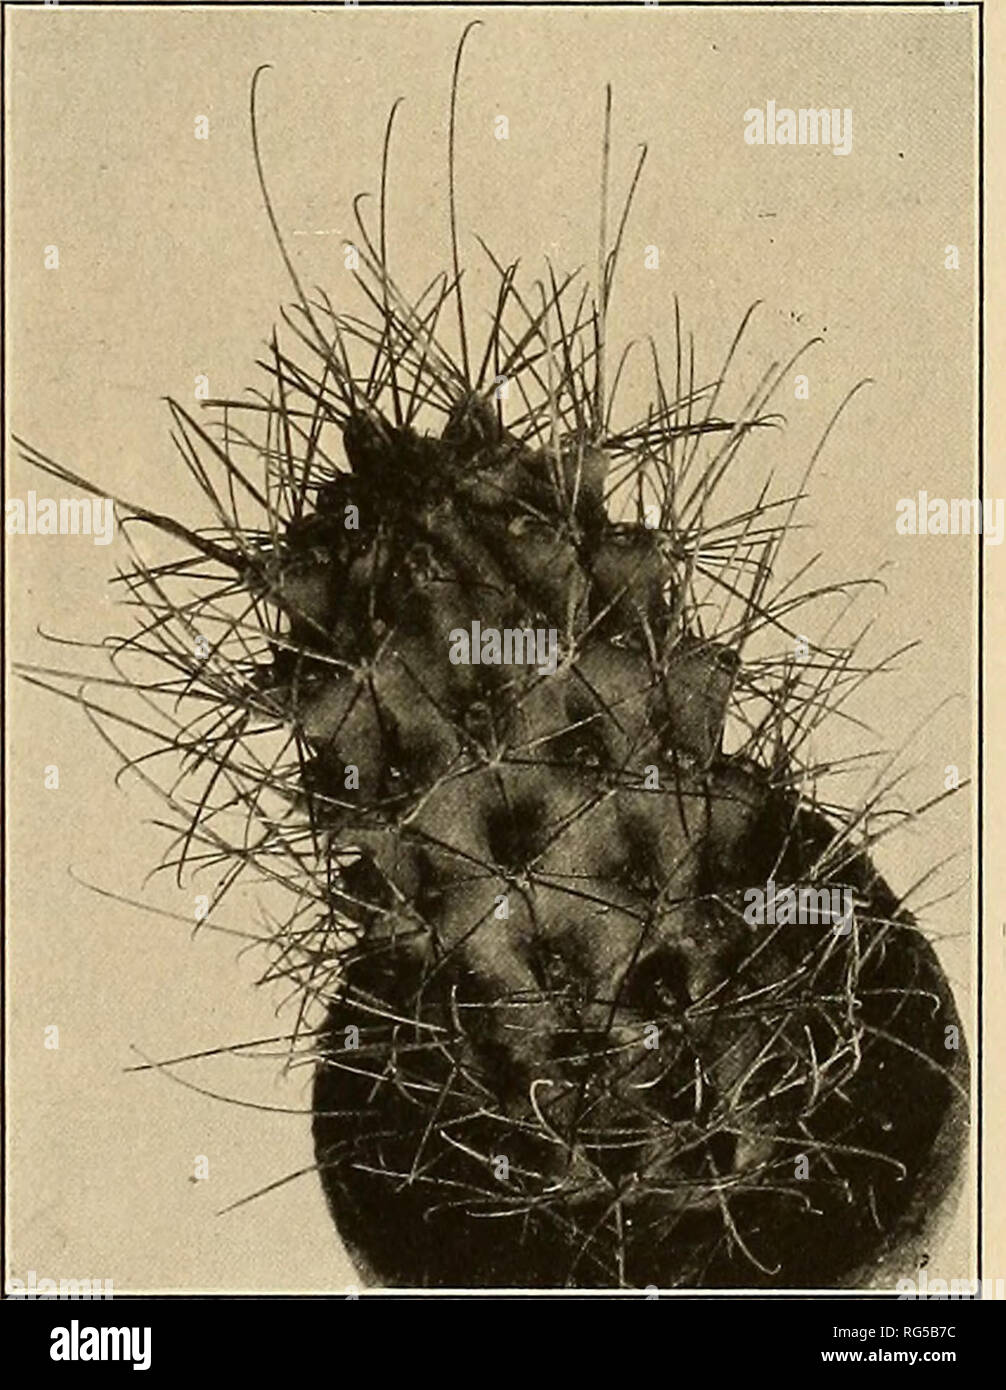 . The Cactaceae : descriptions and illustrations of plants of the cactus family. . Figs. 153 and 153a.âFerocactus uncinatus. its synonyms: Echinocactus longihamatus sinuatus Weber (Monatsschr. Kakteenk. 12: 69. 1902), Echinocactus longihamatus bicolor (Monatsschr. Kakteenk. 3: 140. 1893), &amp;â longi- hamatus deflexispinus (Monatsschr. Kakteenk. 12: 69. 1902), E. longihamatus insignis (Monatsschr. Kakteenk. 12: 69. 1902), and E. texensis treculianus (Forster, Handb. Cact. ed. 2. 504. 1885). Echinocactus deflexispinus Gruson (Schumann, Gesamtb. Kakteen 343. 1898) was never described; it was co Stock Photo